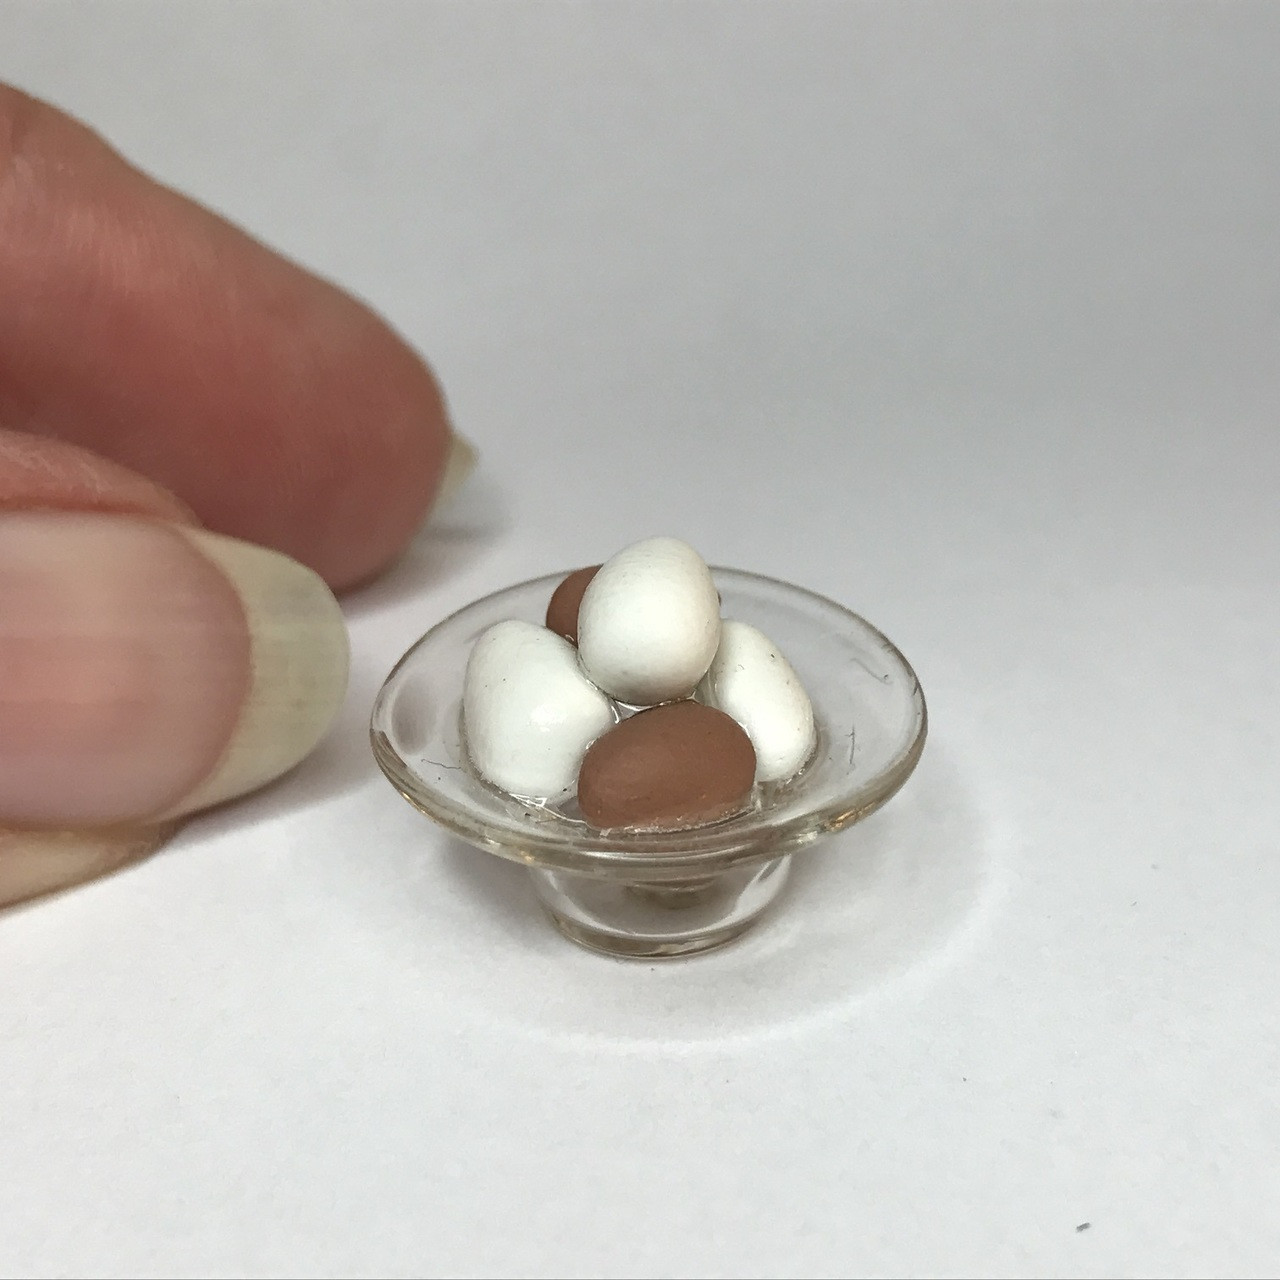 Alternate view of miniature glass bowl with brown and white eggs